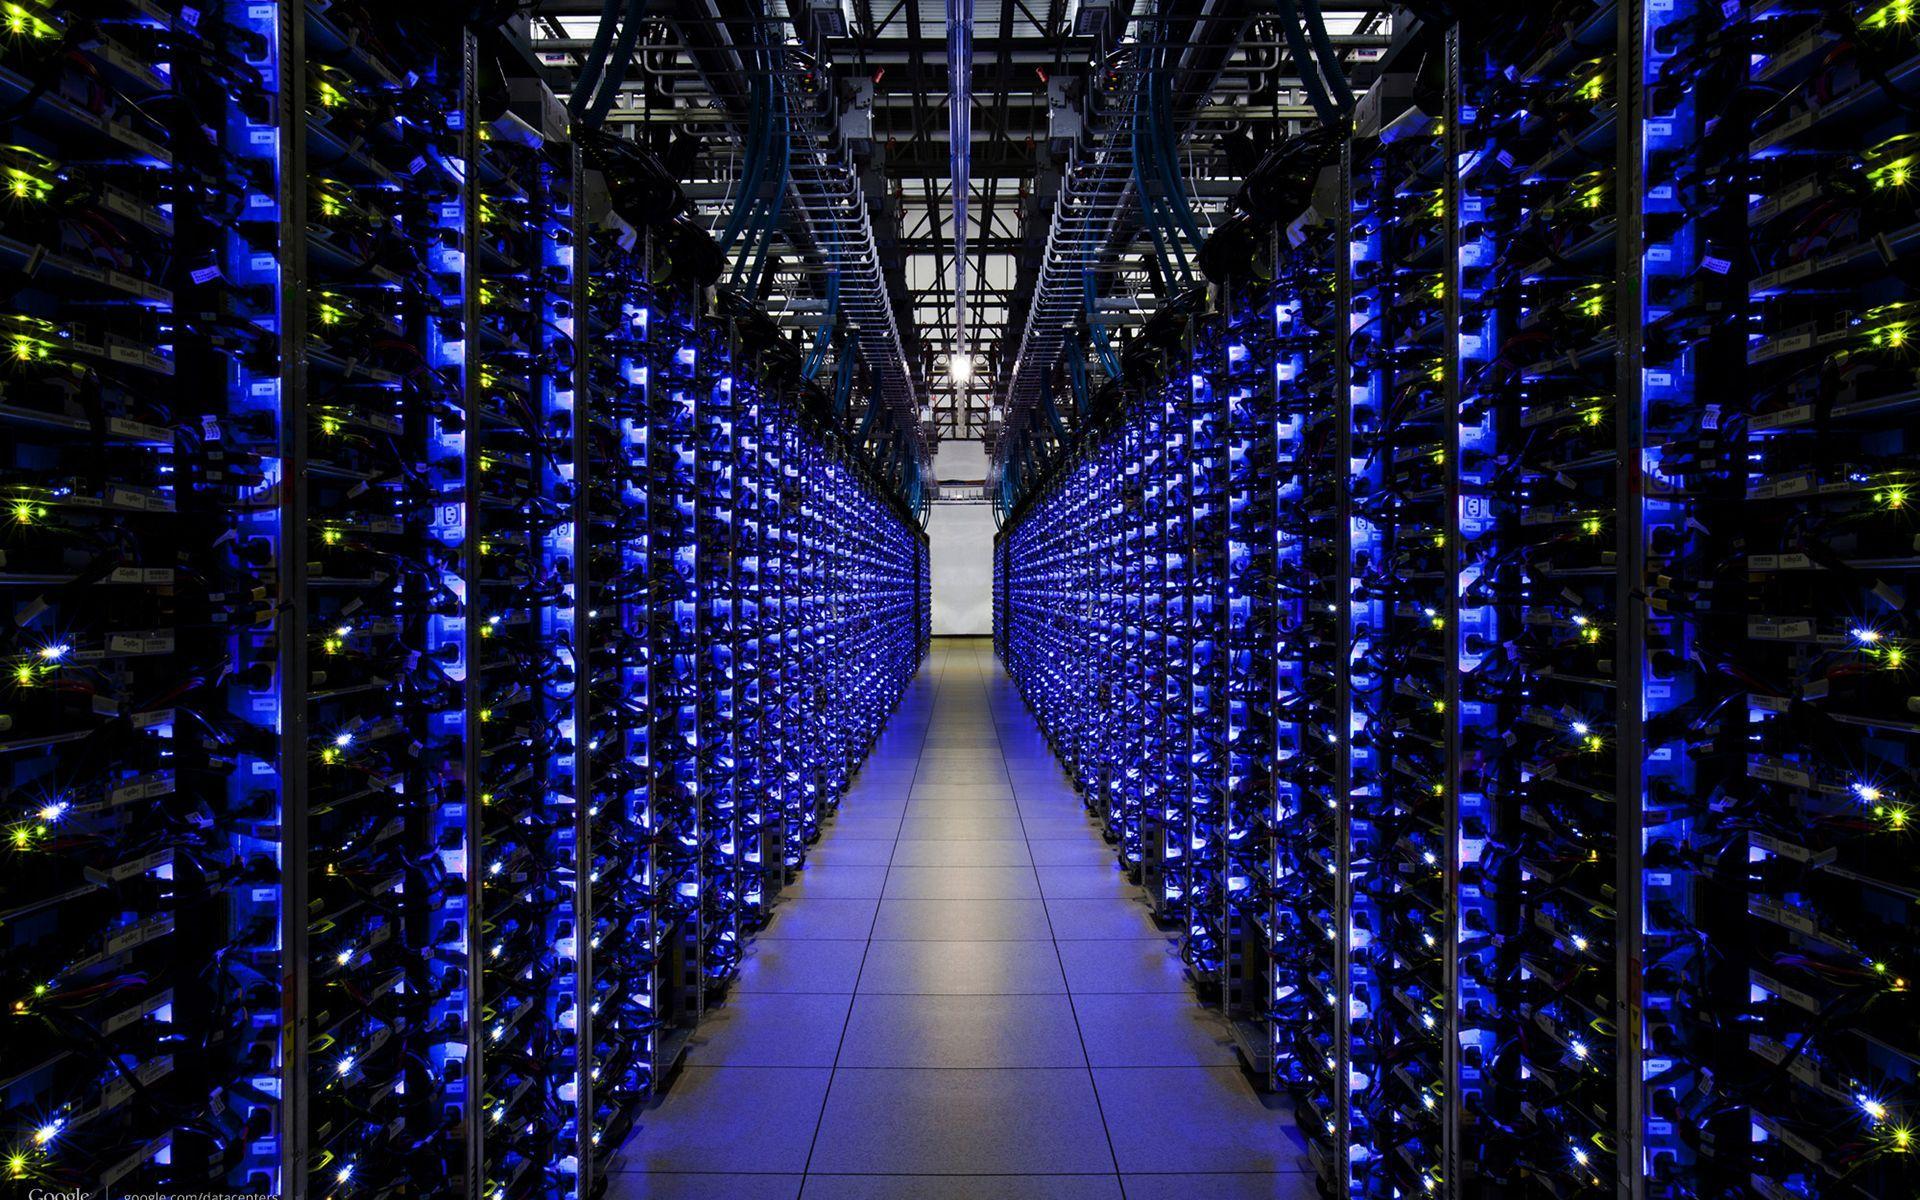 To Download or Set this Free Blue Server Room Design Wallpaper as